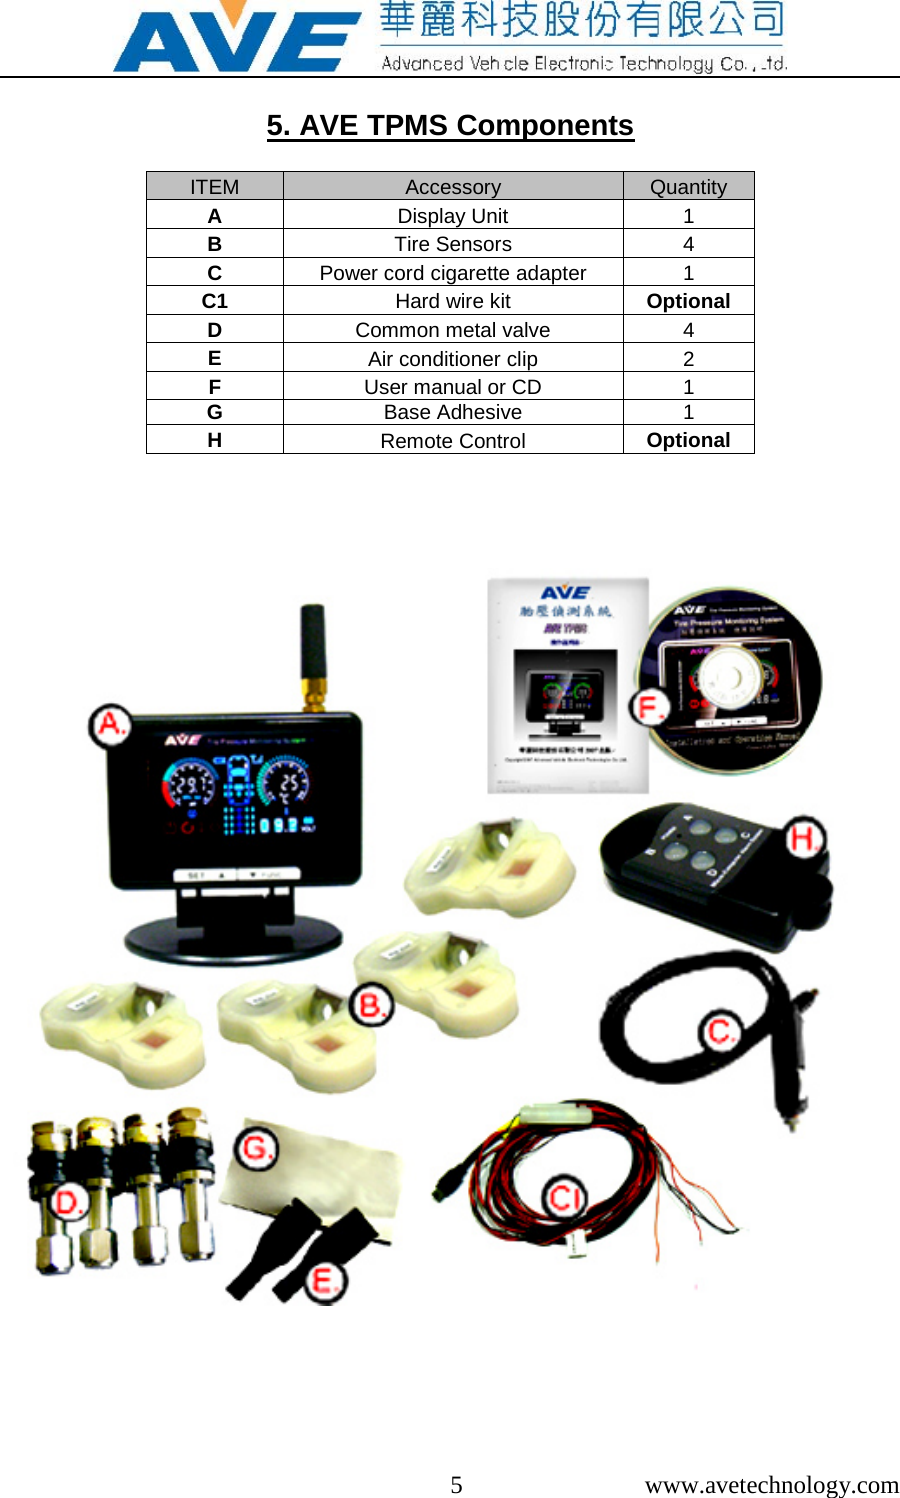  5  www.avetechnology.com  5. AVE TPMS Components  ITEM Accessory Quantity A Display Unit 1 B Tire Sensors 4 C Power cord cigarette adapter 1 C1 Hard wire kit Optional D Common metal valve 4 E Air conditioner clip 2 F User manual or CD 1 G Base Adhesive 1 H Remote Control Optional      